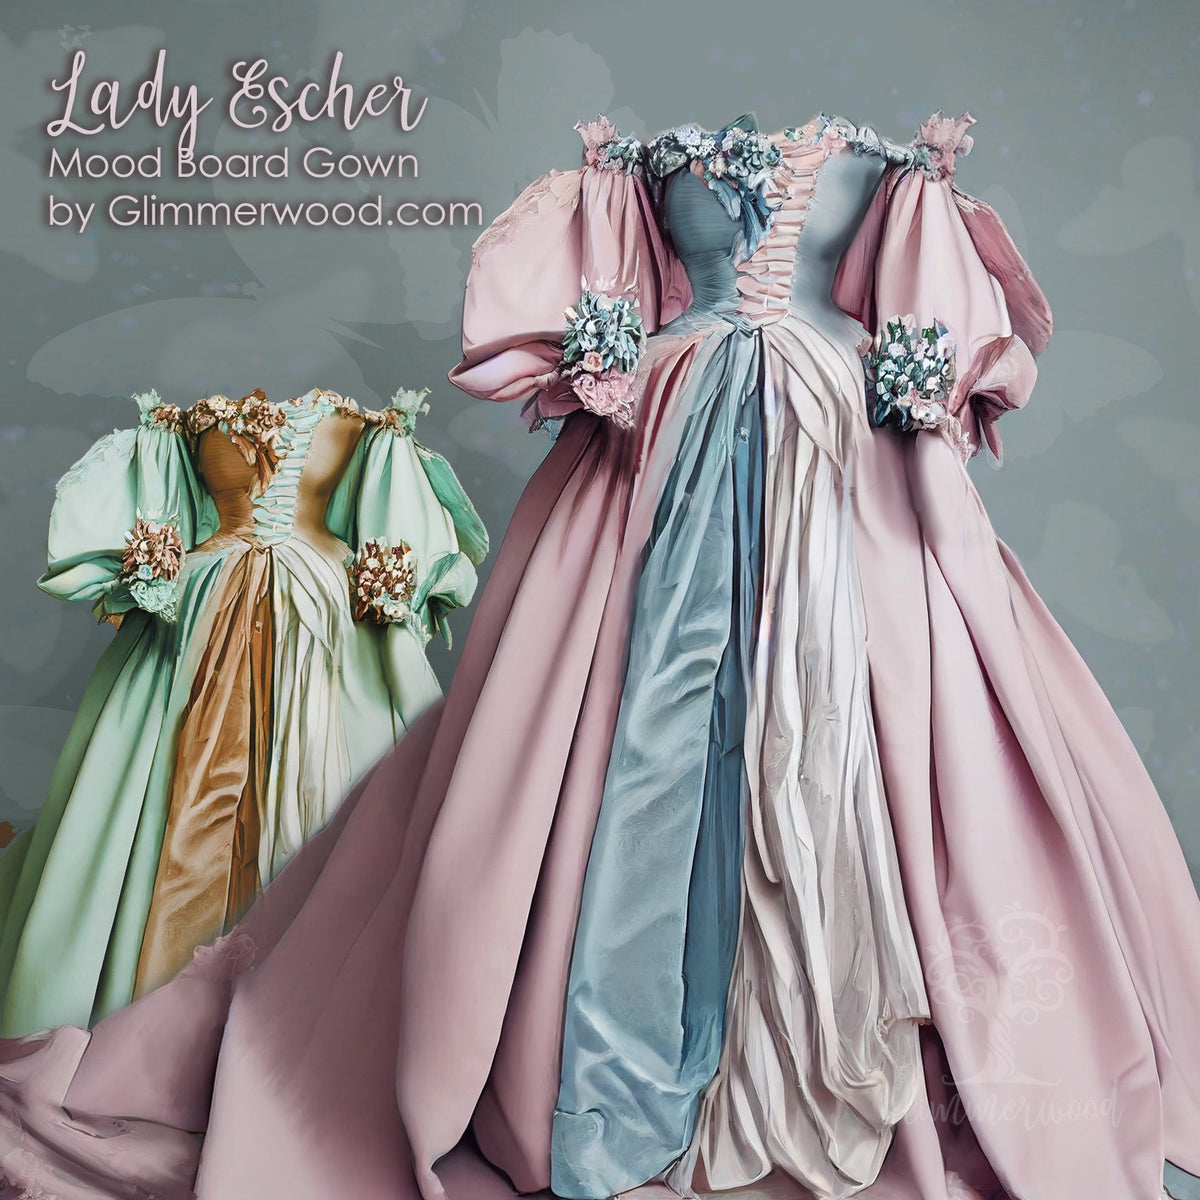 Lady Escher - Limited-Edition Mood Board Gown